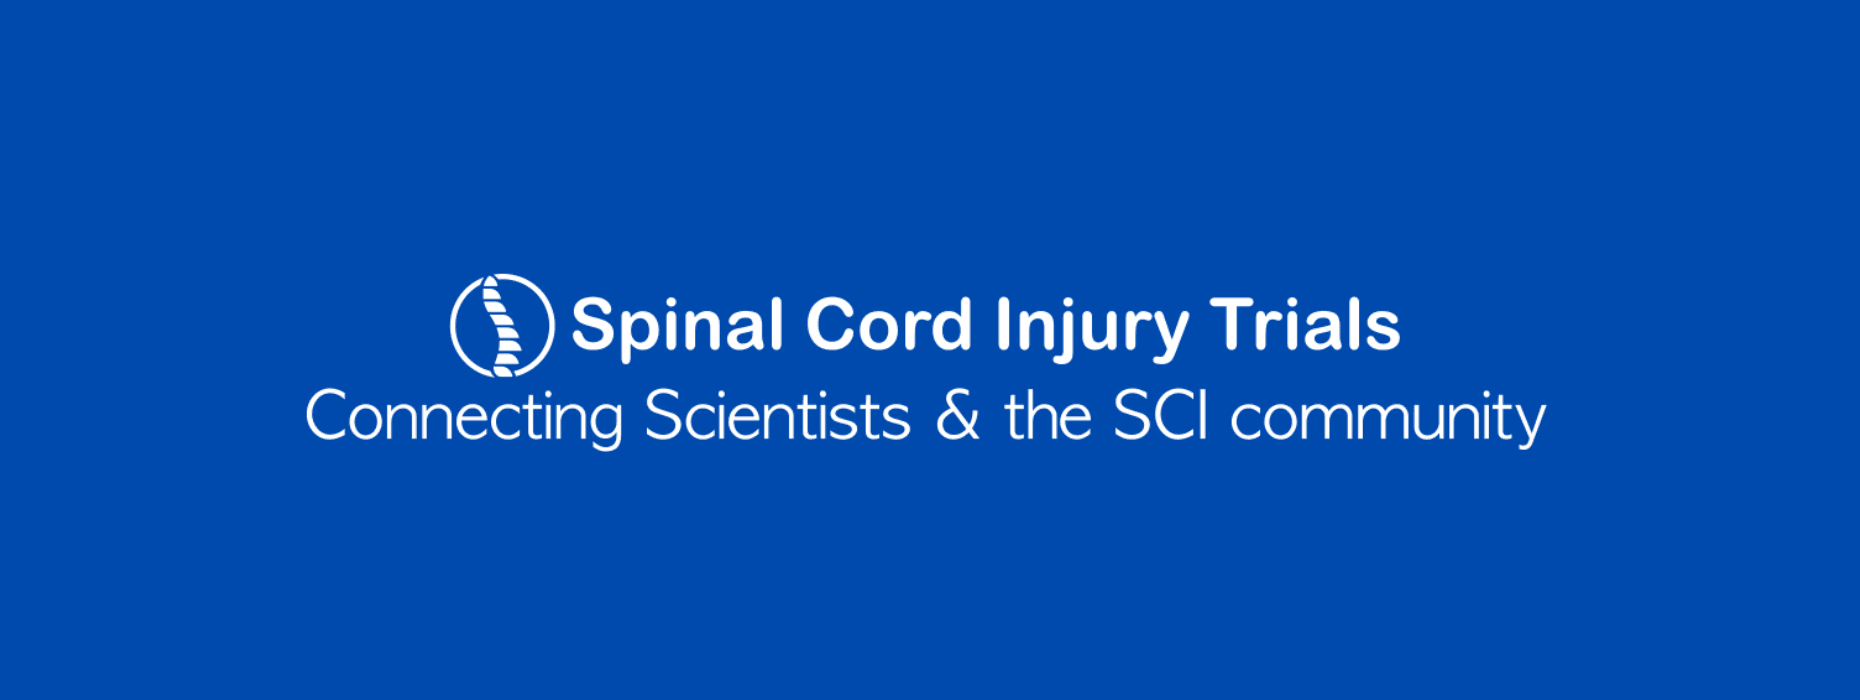 Spinal Cord Injury Trials